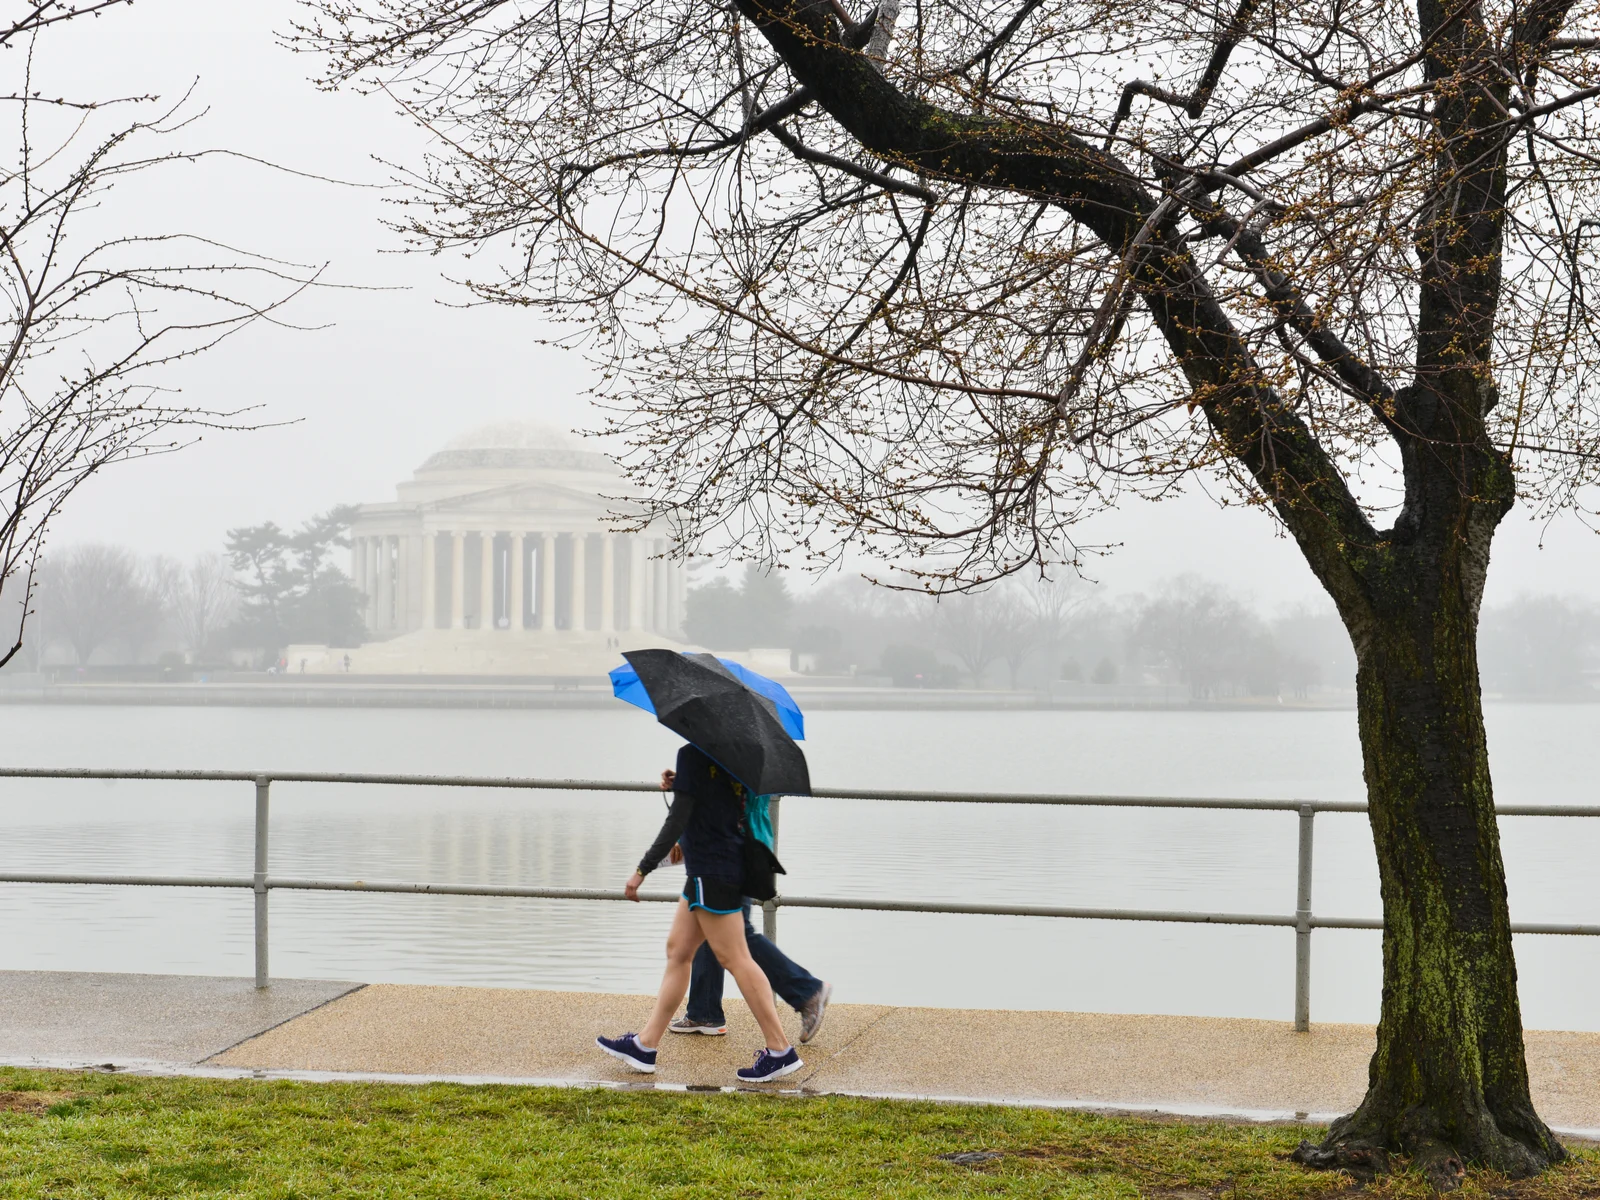 Washington DC pictured during the worst time to visit with the Jefferson Memorial on a rainy day